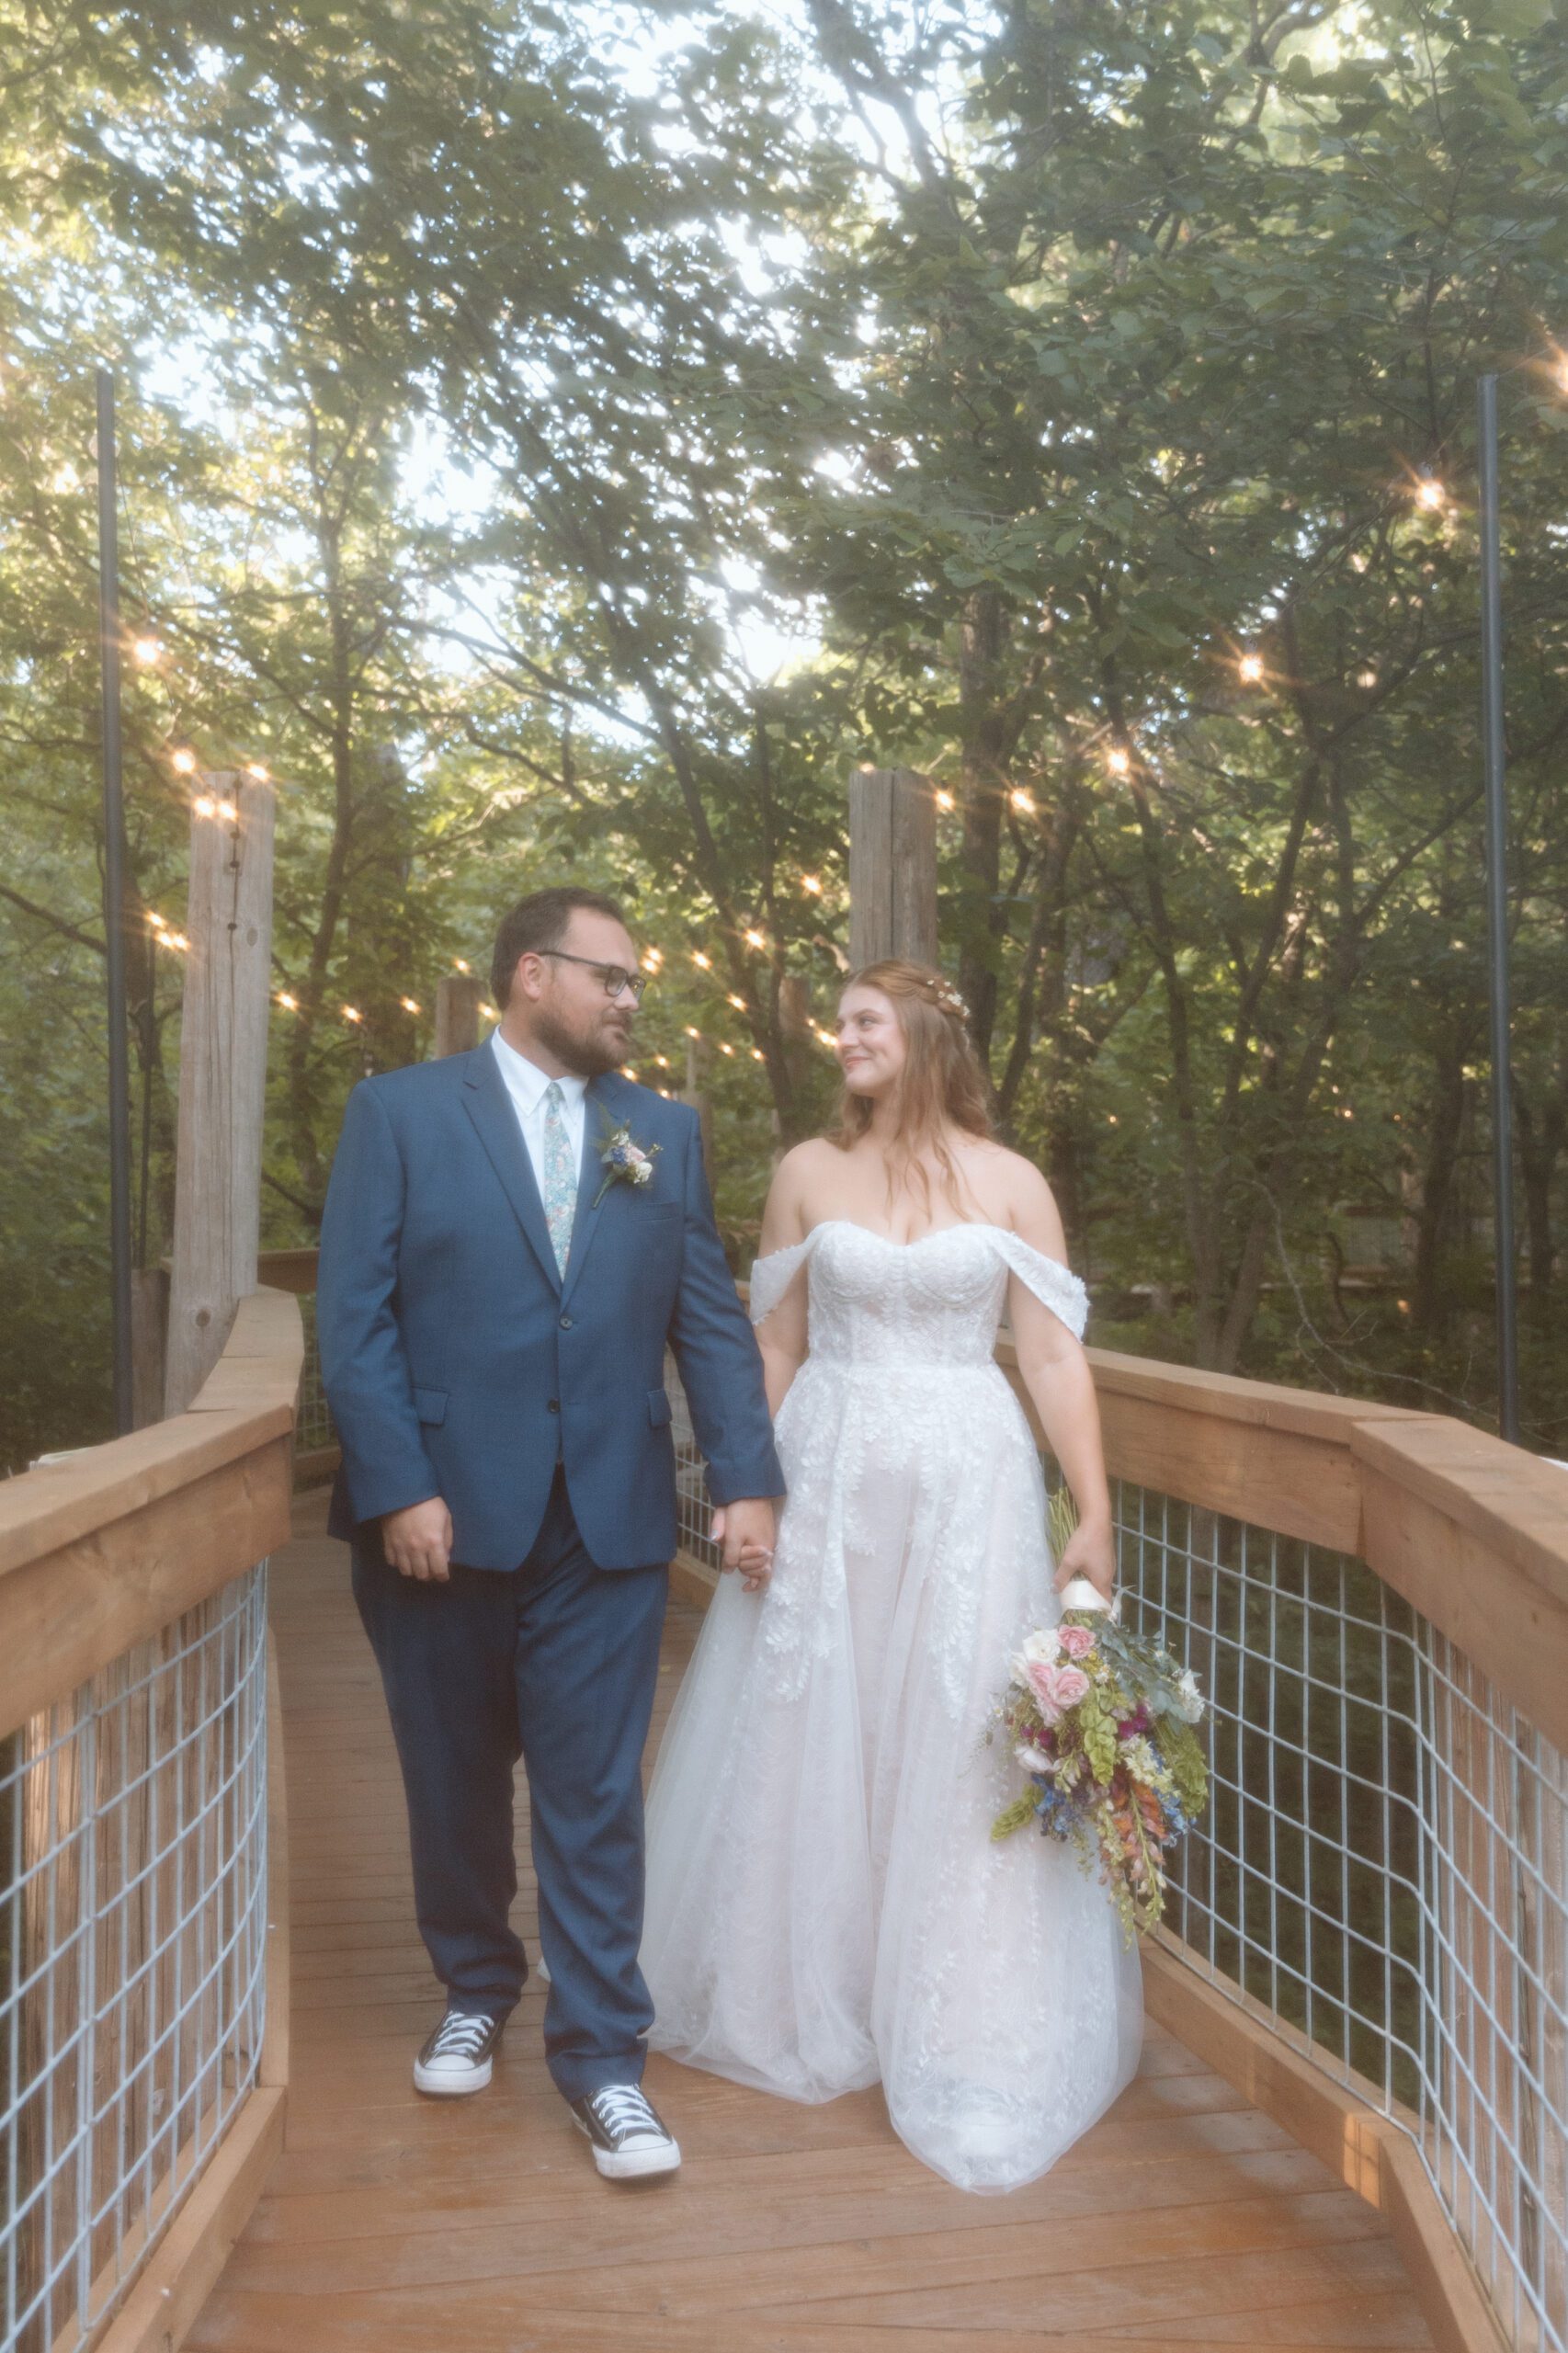 Whimsical forest wedding at Merrick Hollow